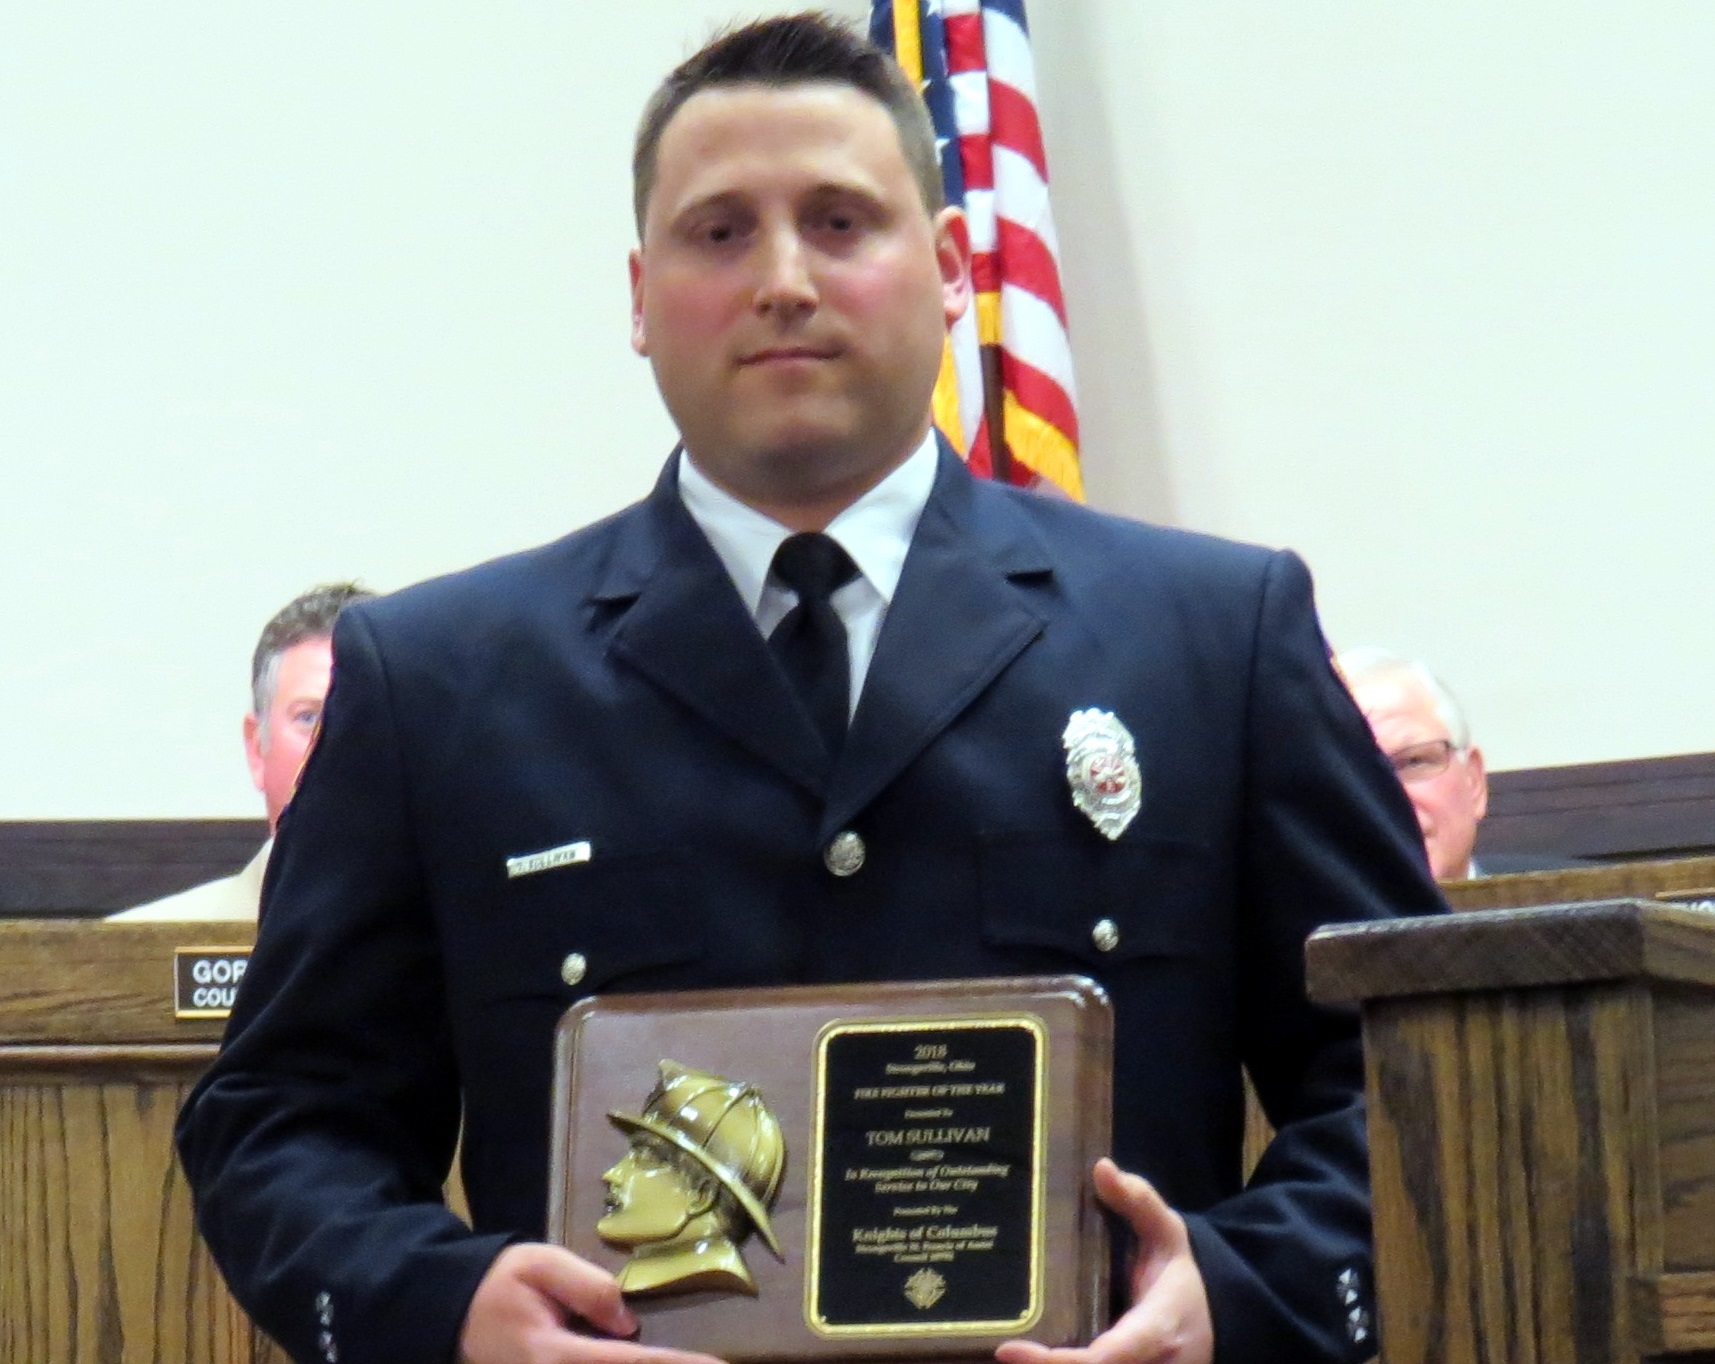 Sullivan is Firefighter of the Year